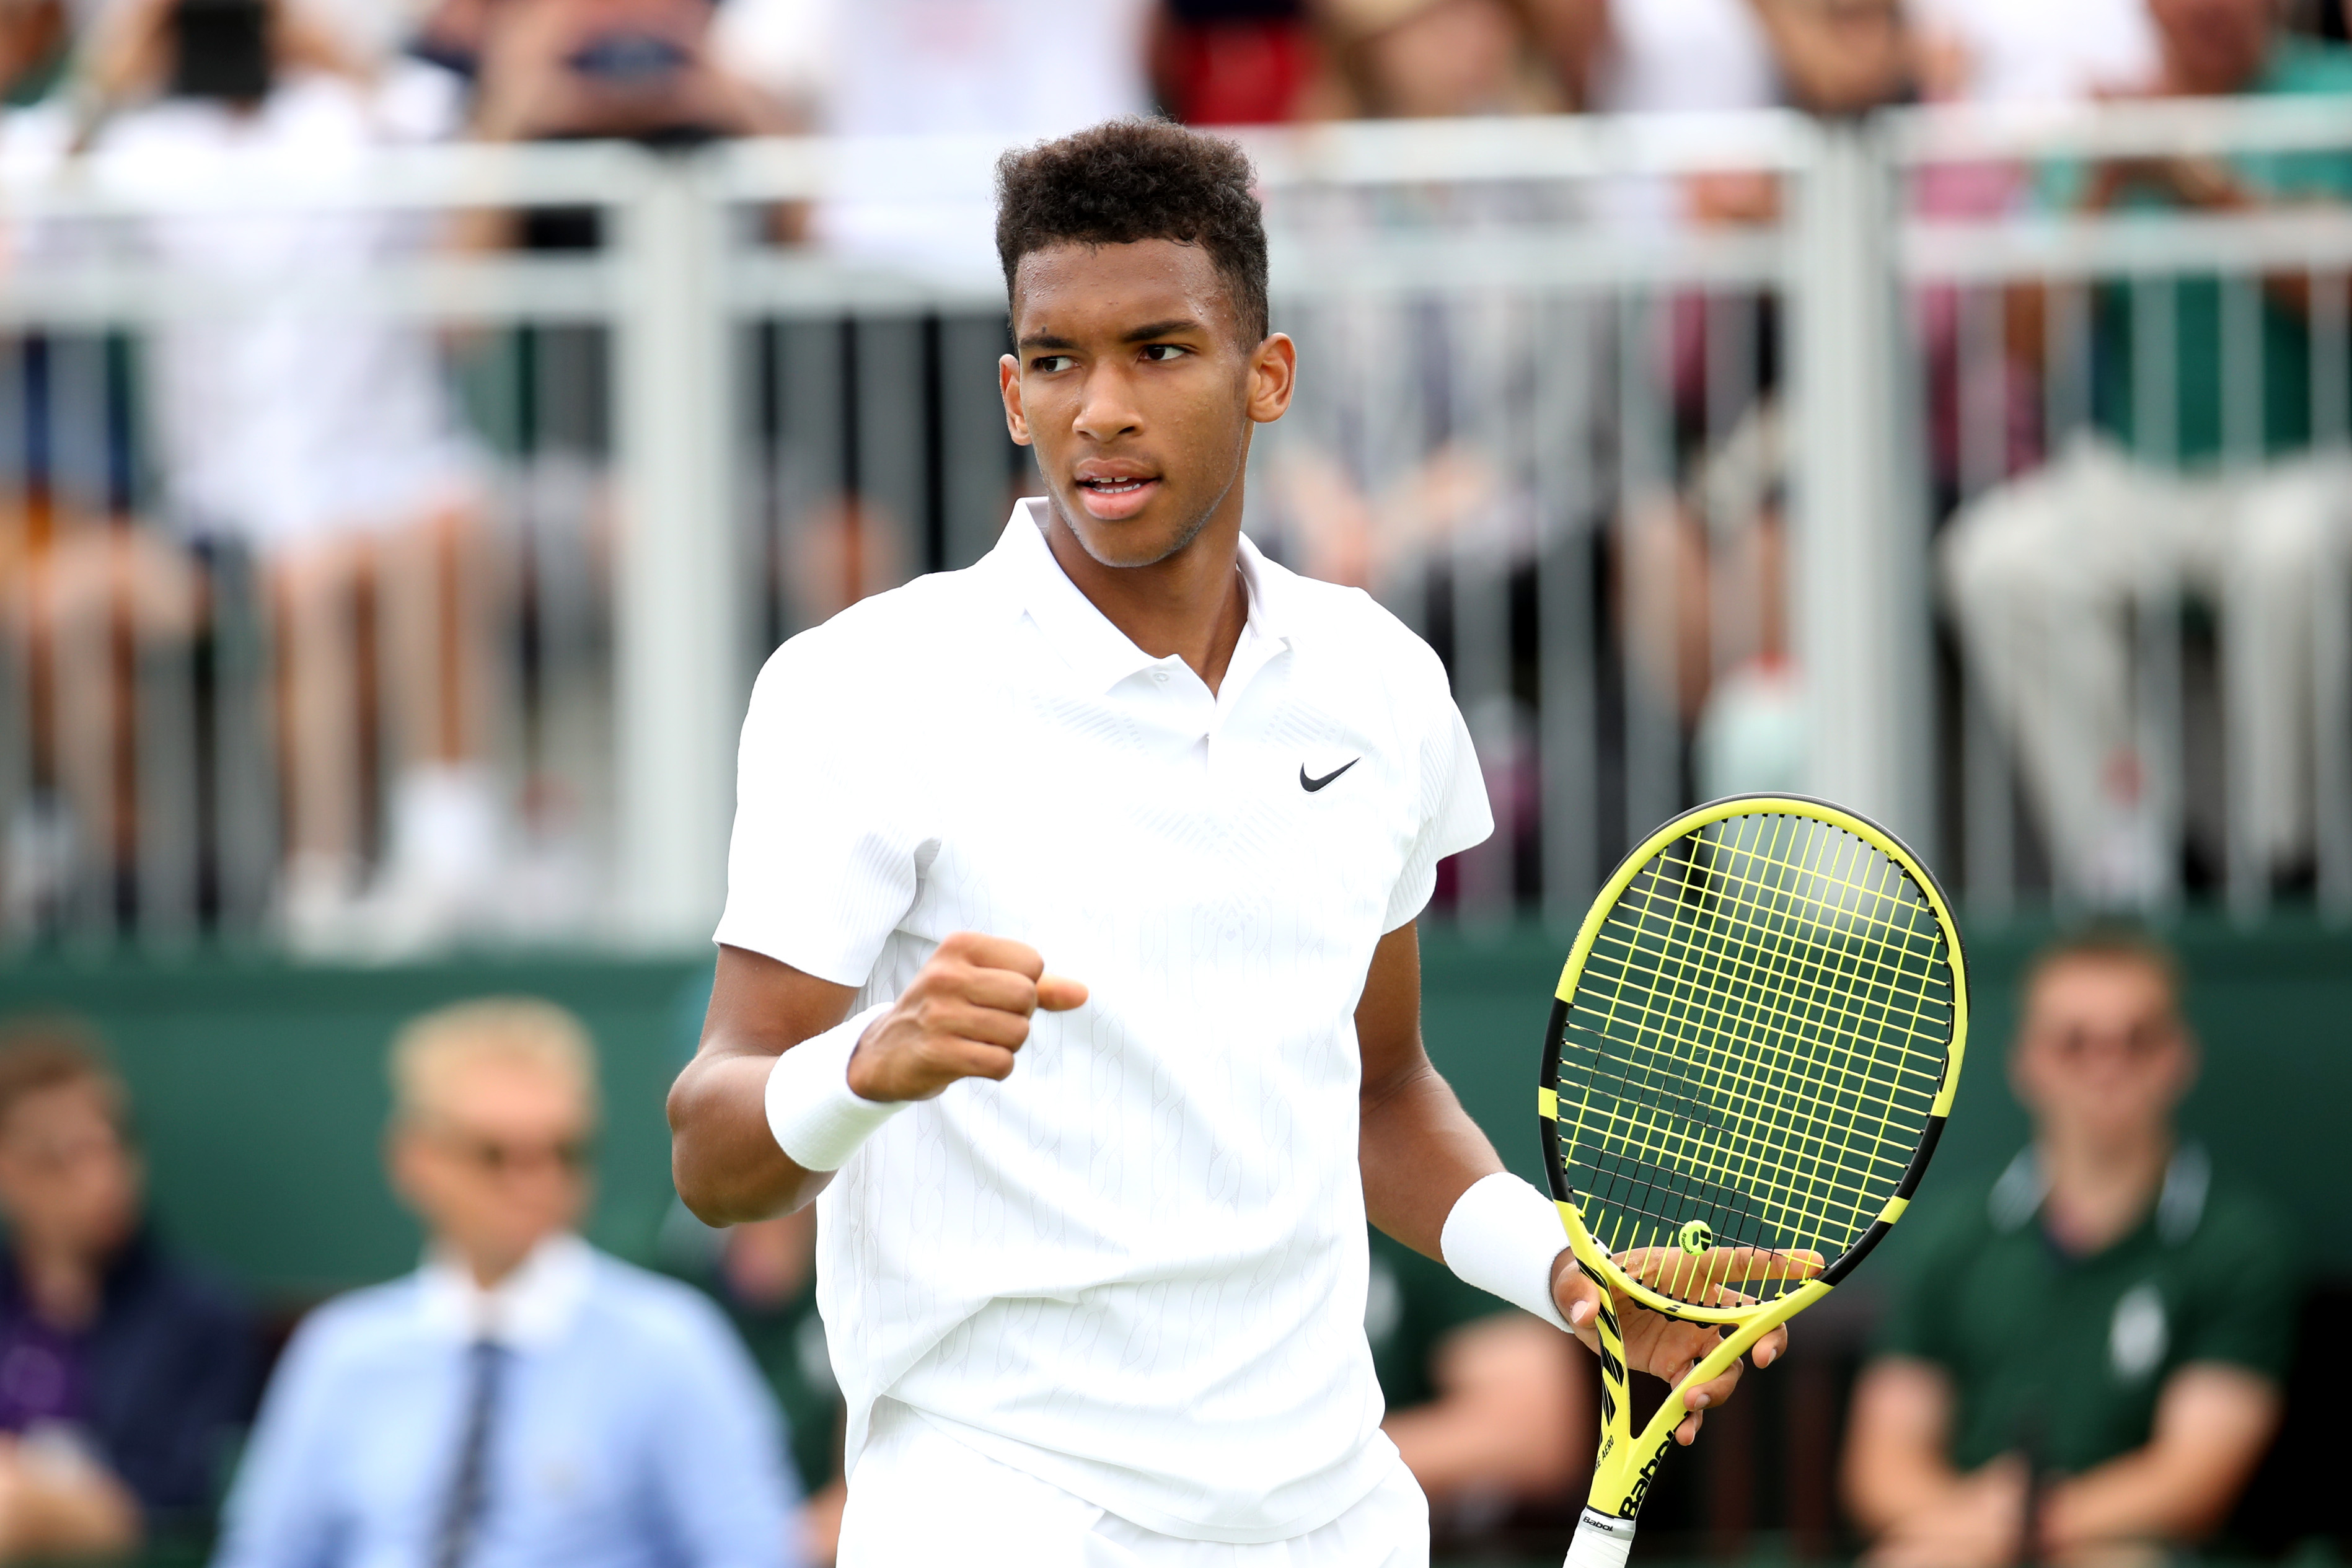 Auger-Aliassime—co-6th favorite to win Wimbledon—wins first Slam match